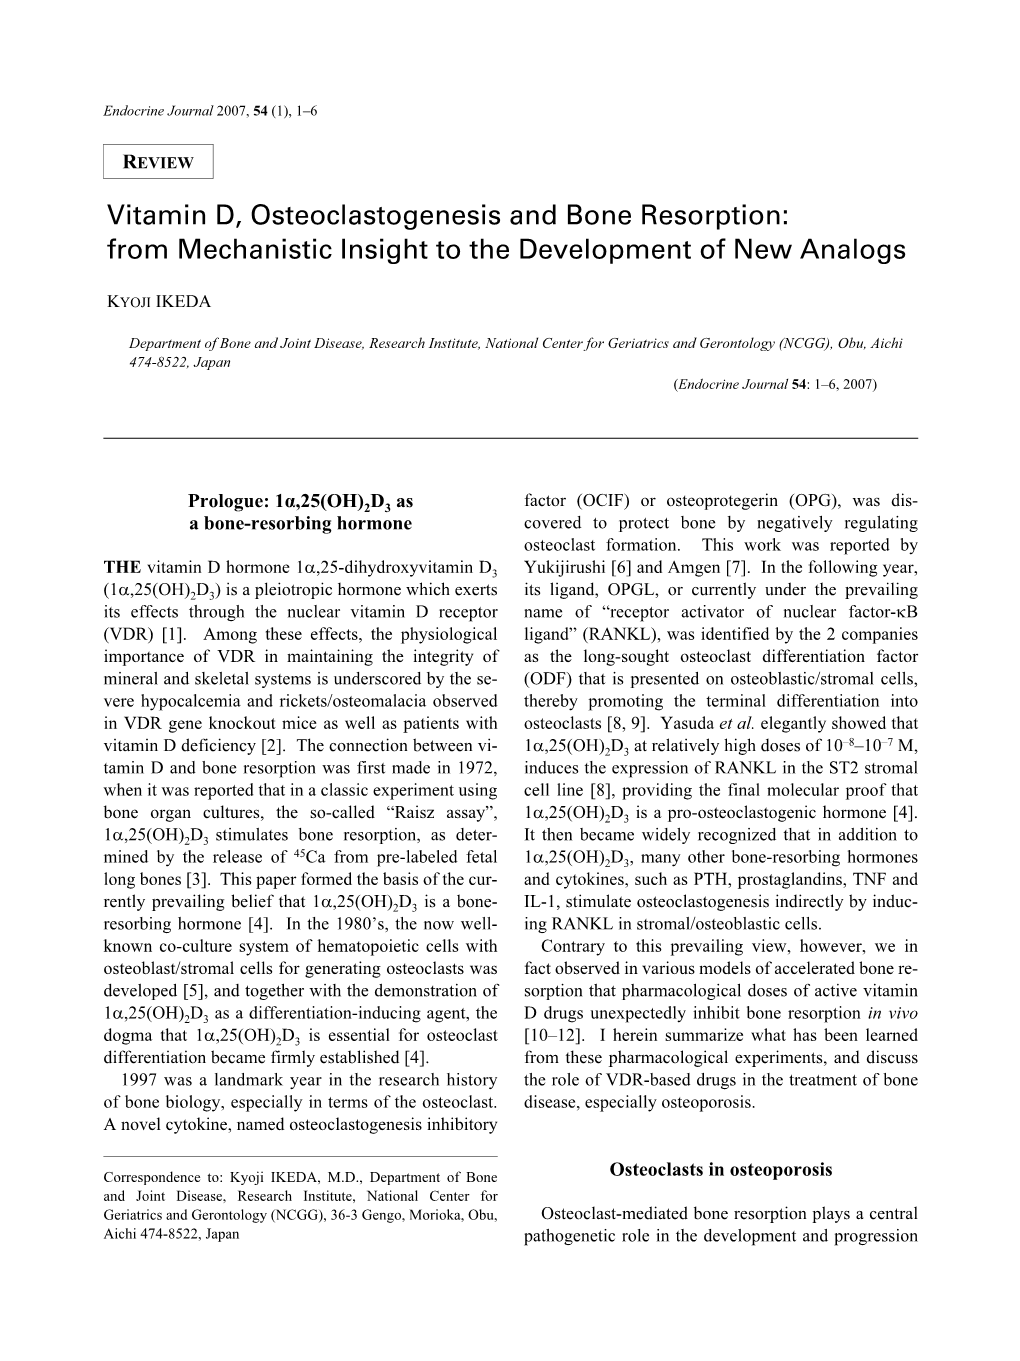 Vitamin D, Osteoclastogenesis and Bone Resorption: from Mechanistic Insight to the Development of New Analogs